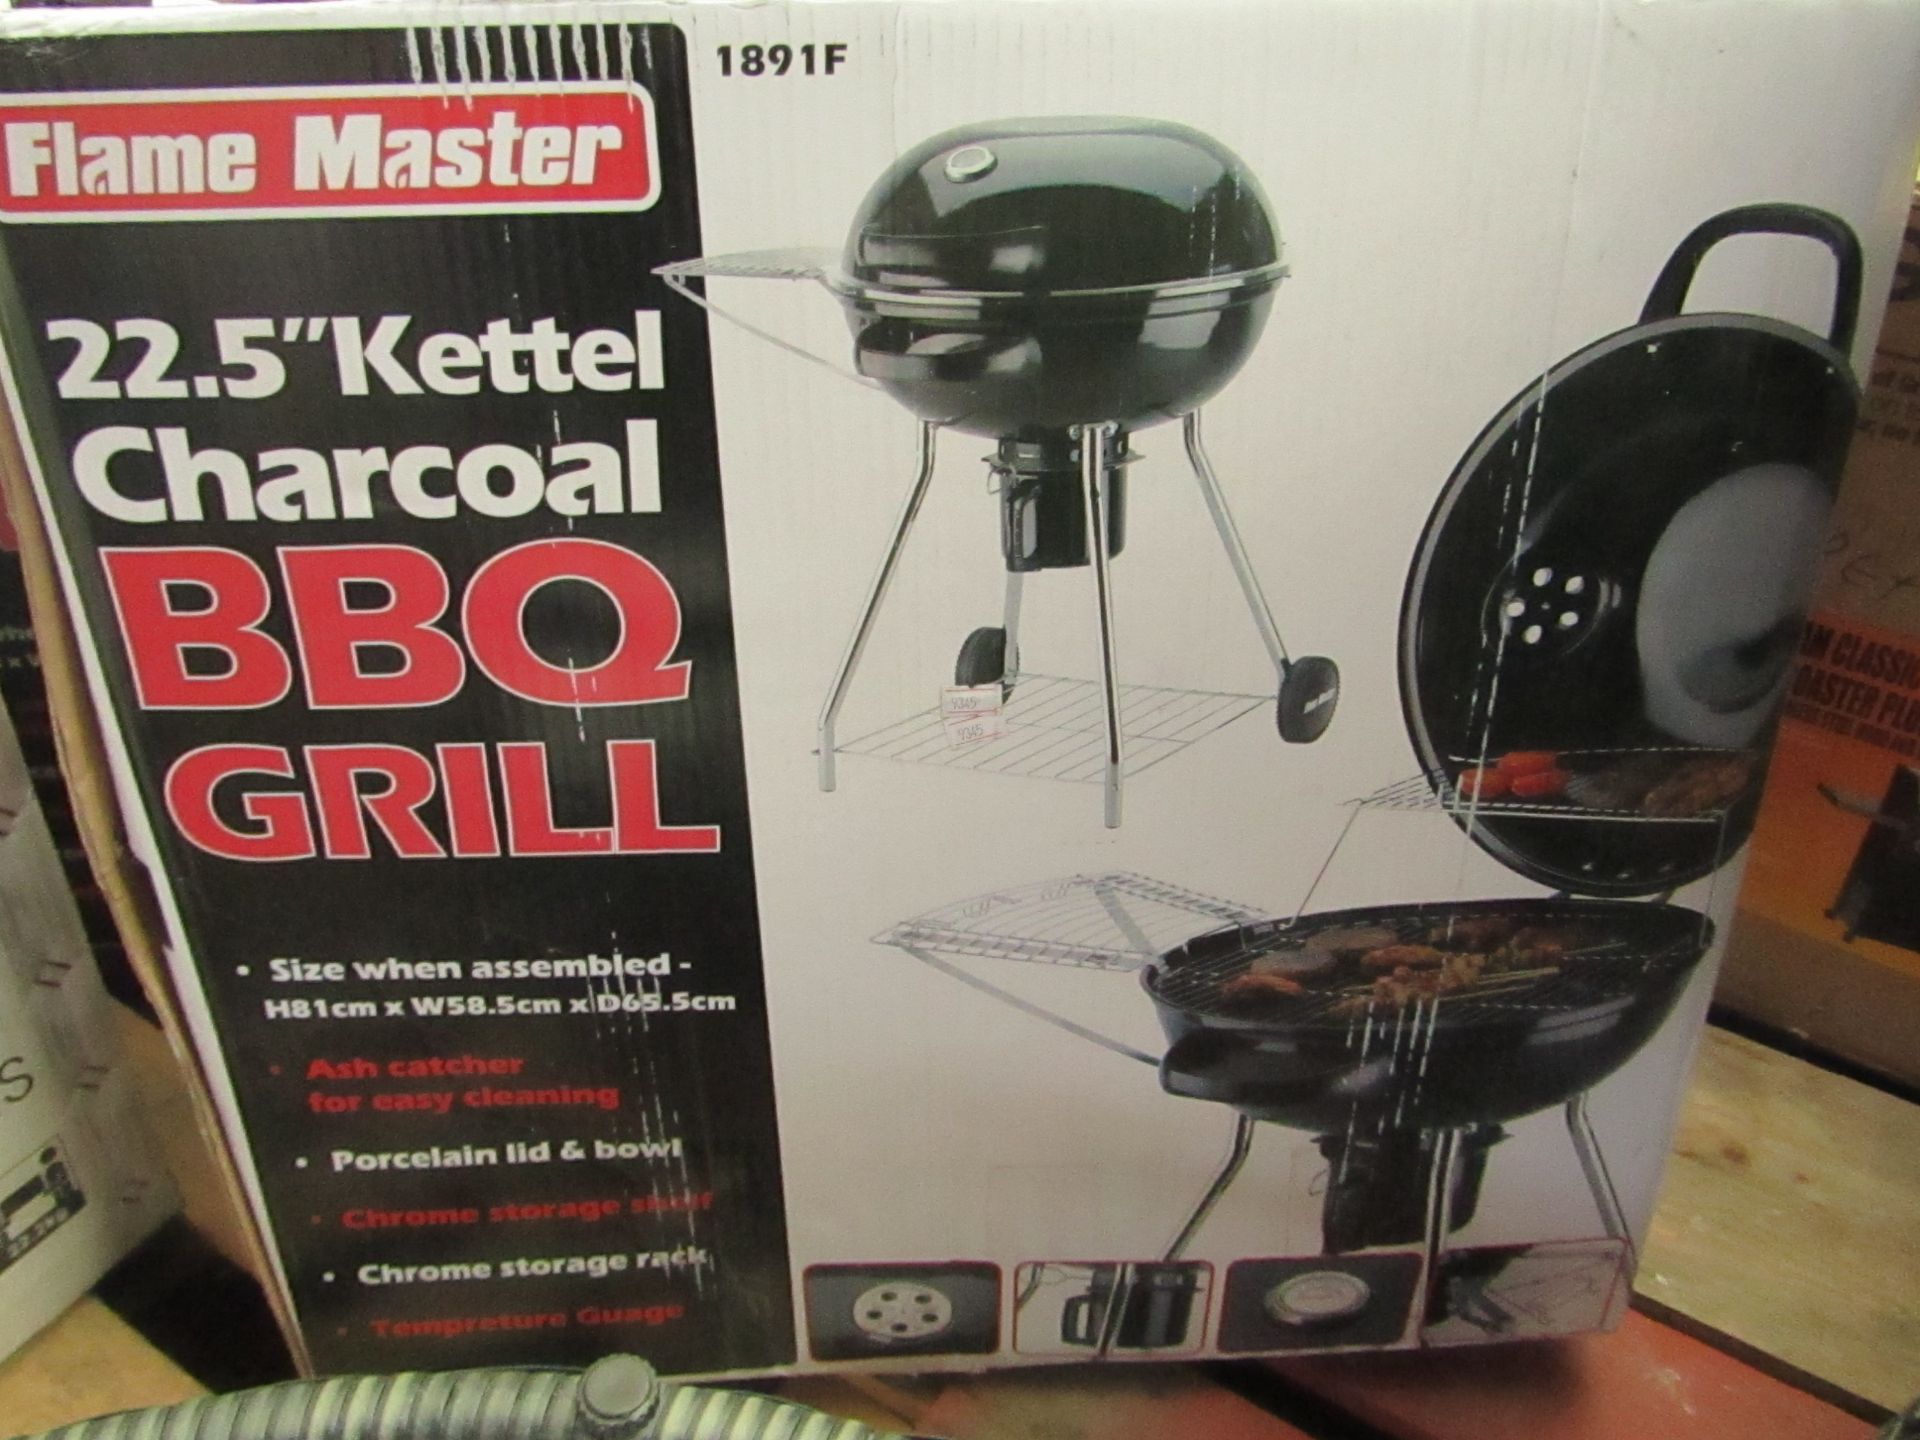 Flame master 22.5" kettel charcoal bbq grill, unchecked and boxed.